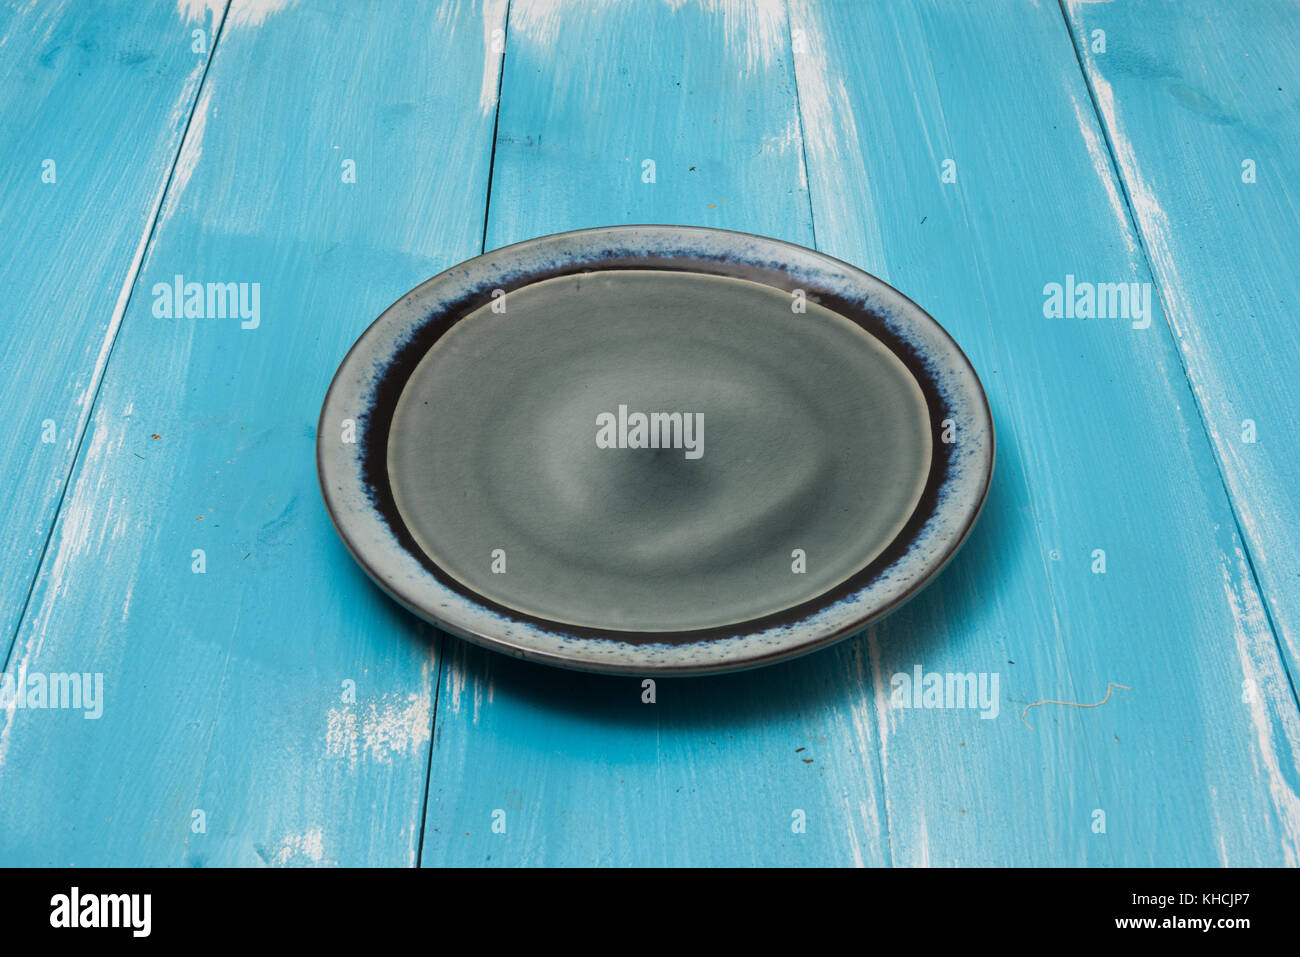 Round plate on blue wooden table with perspective side view Stock Photo